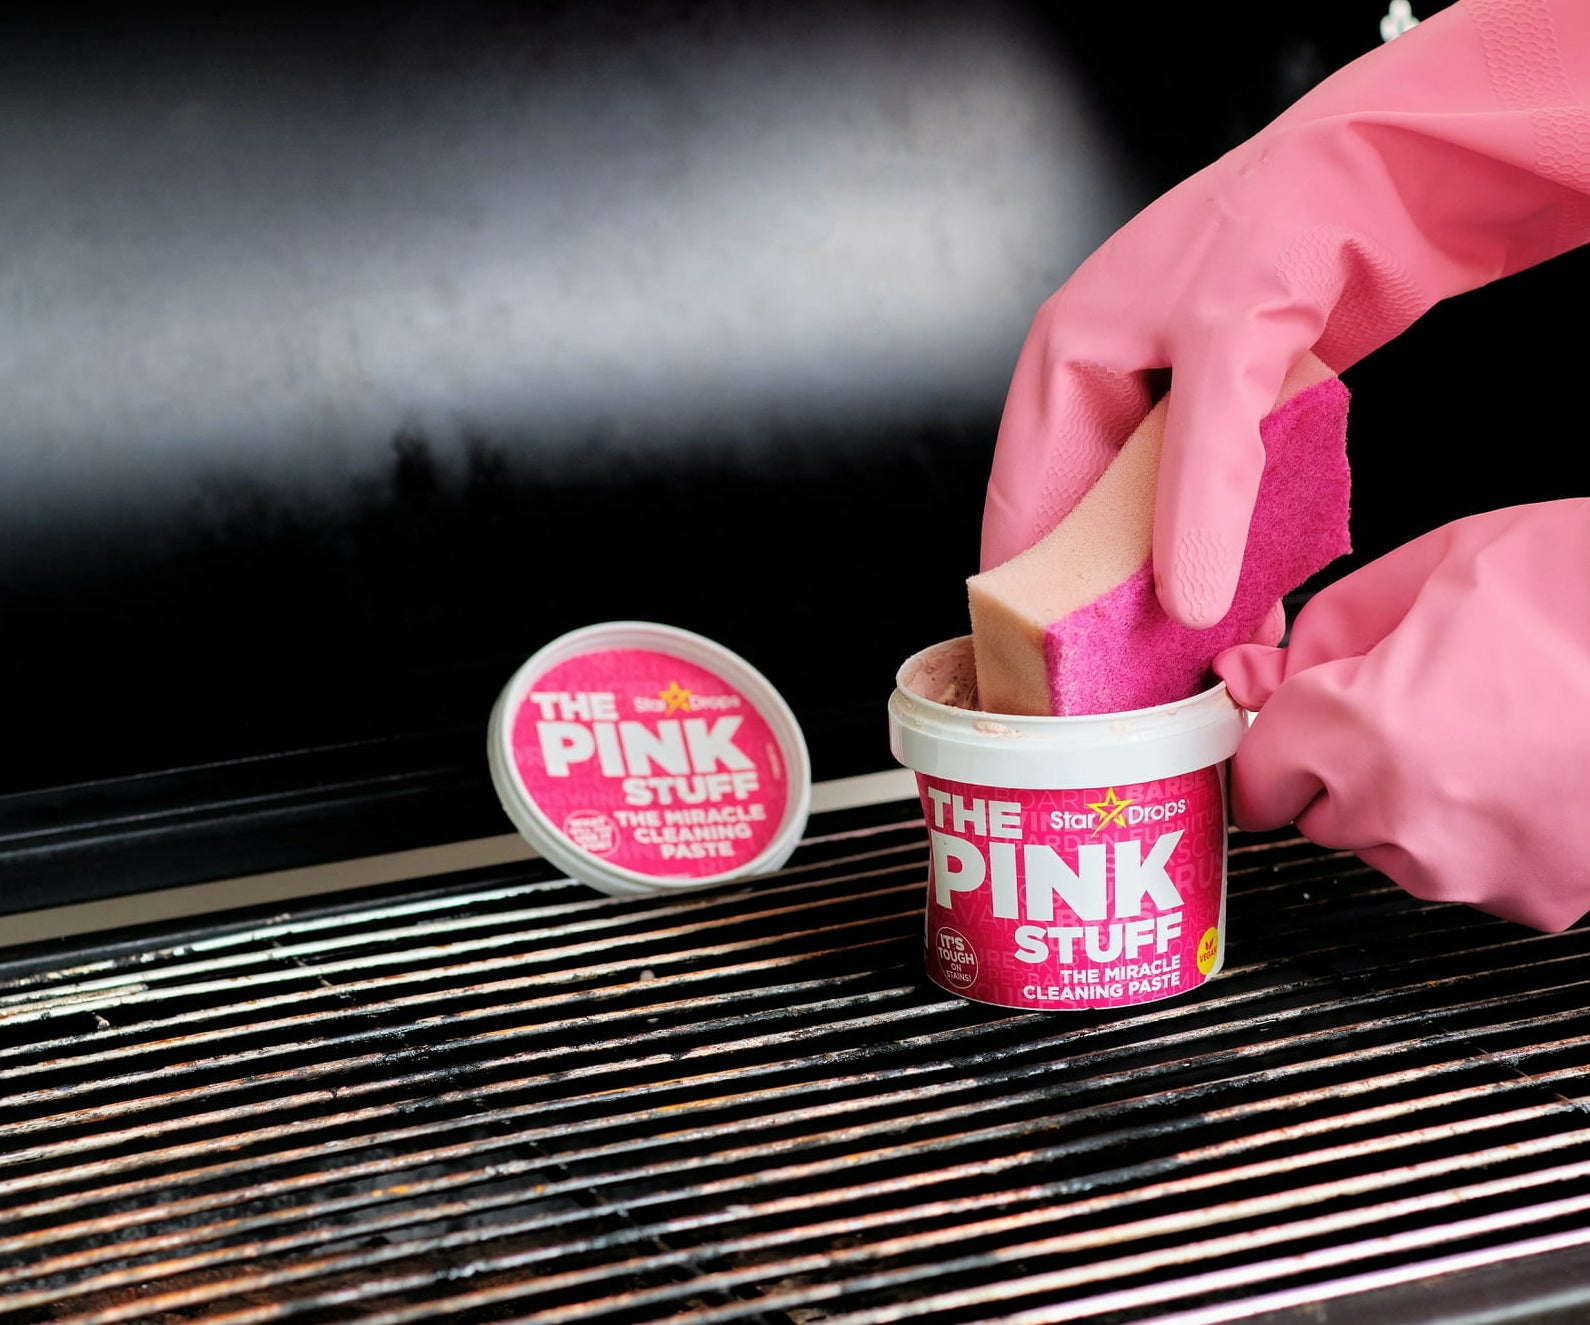 Model using the Pink Stuff on a grill with a sponge